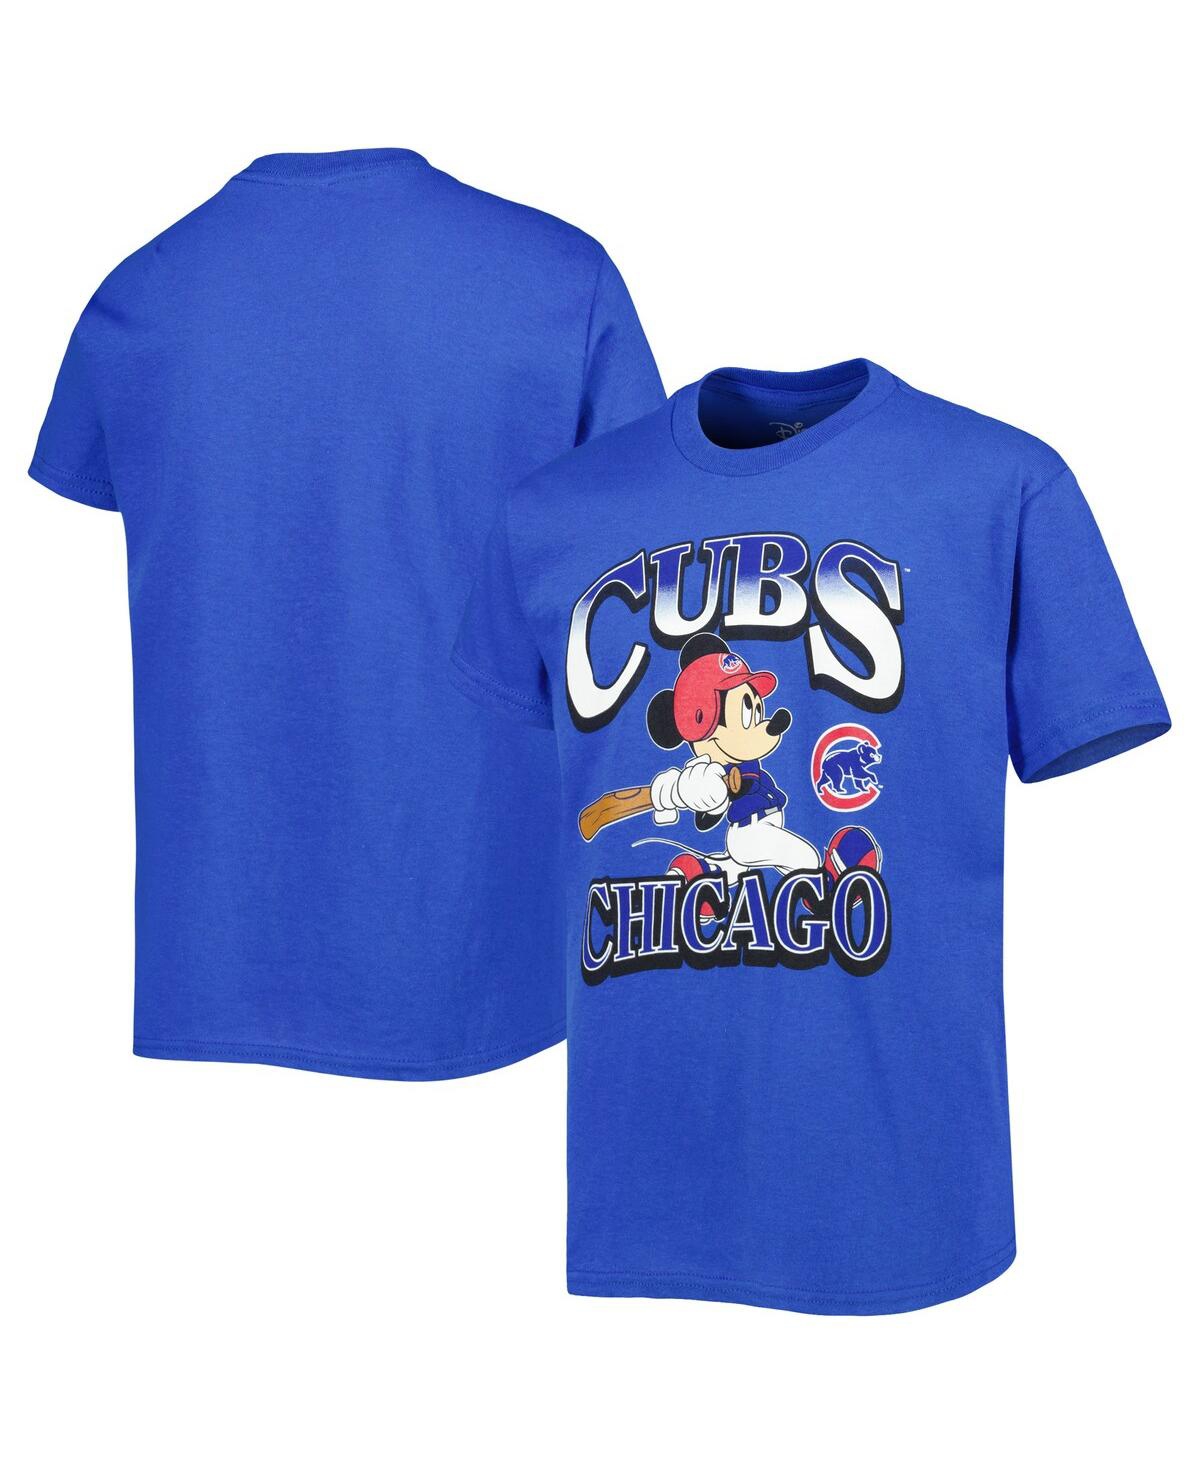 Outerstuff Kids' Big Boys And Girls Royal Chicago Cubs Disney Game Day T-shirt